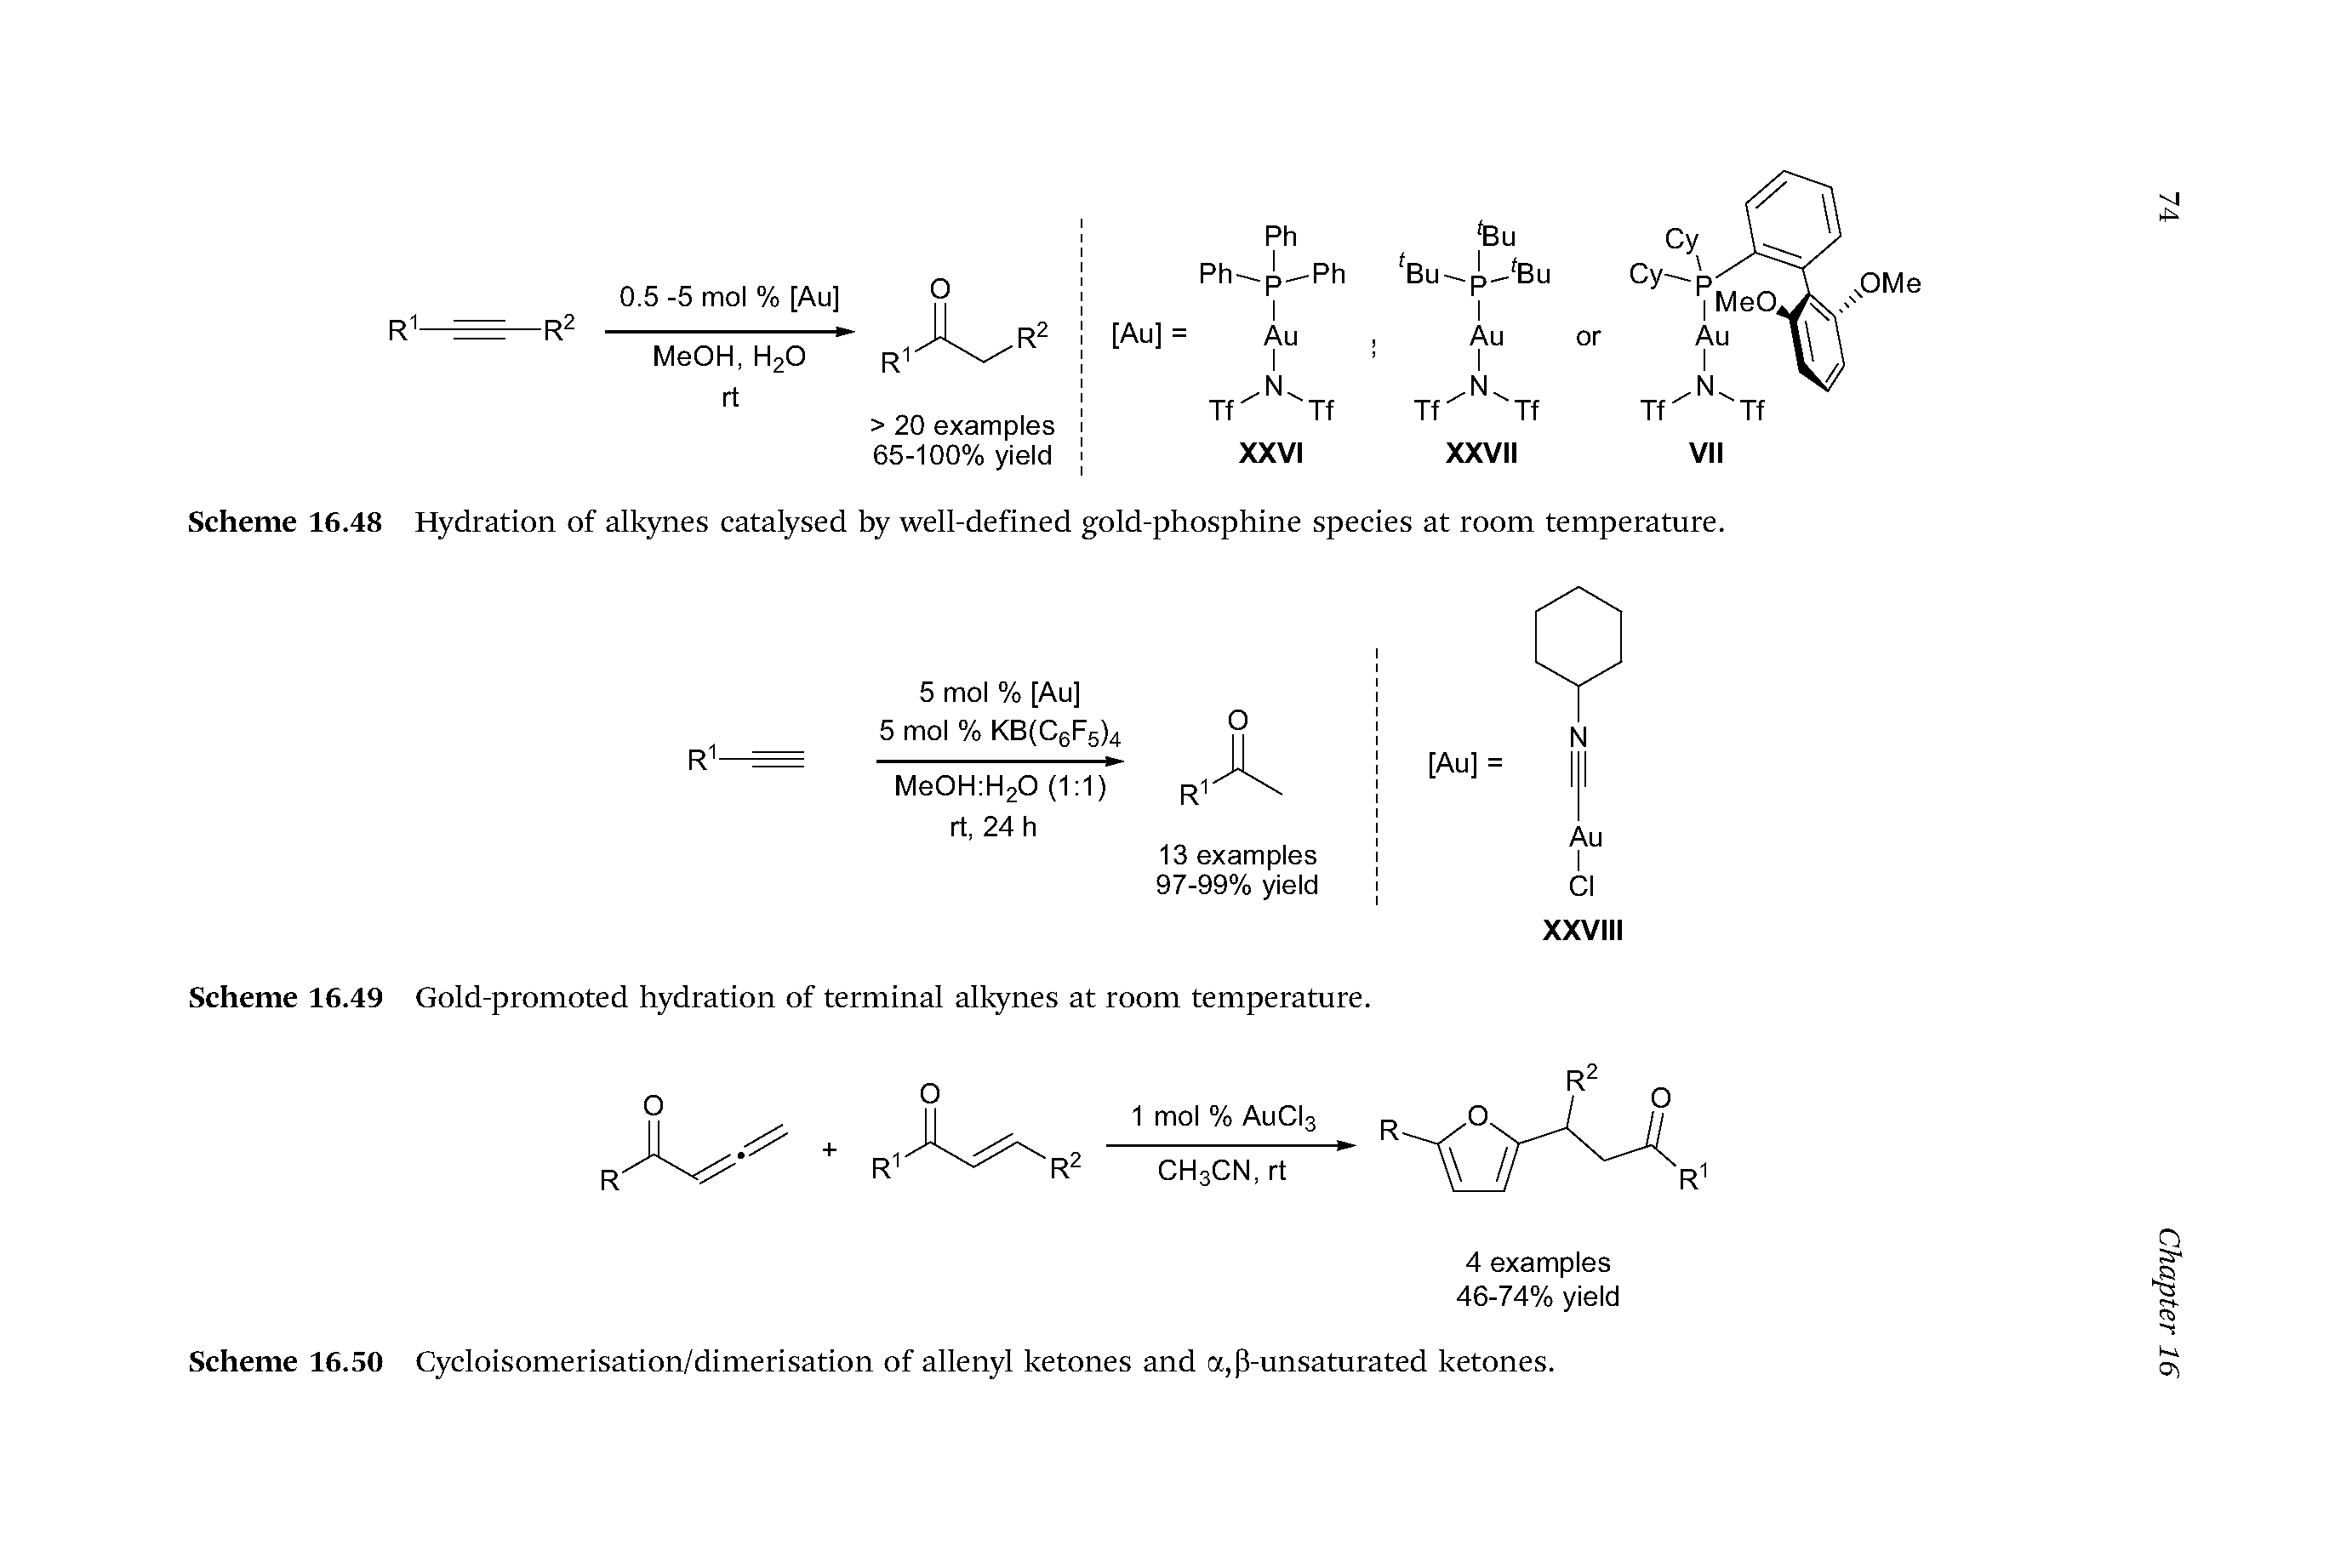 Scheme 16.49 Gold-promoted hydration of terminal alkynes at room temperature.